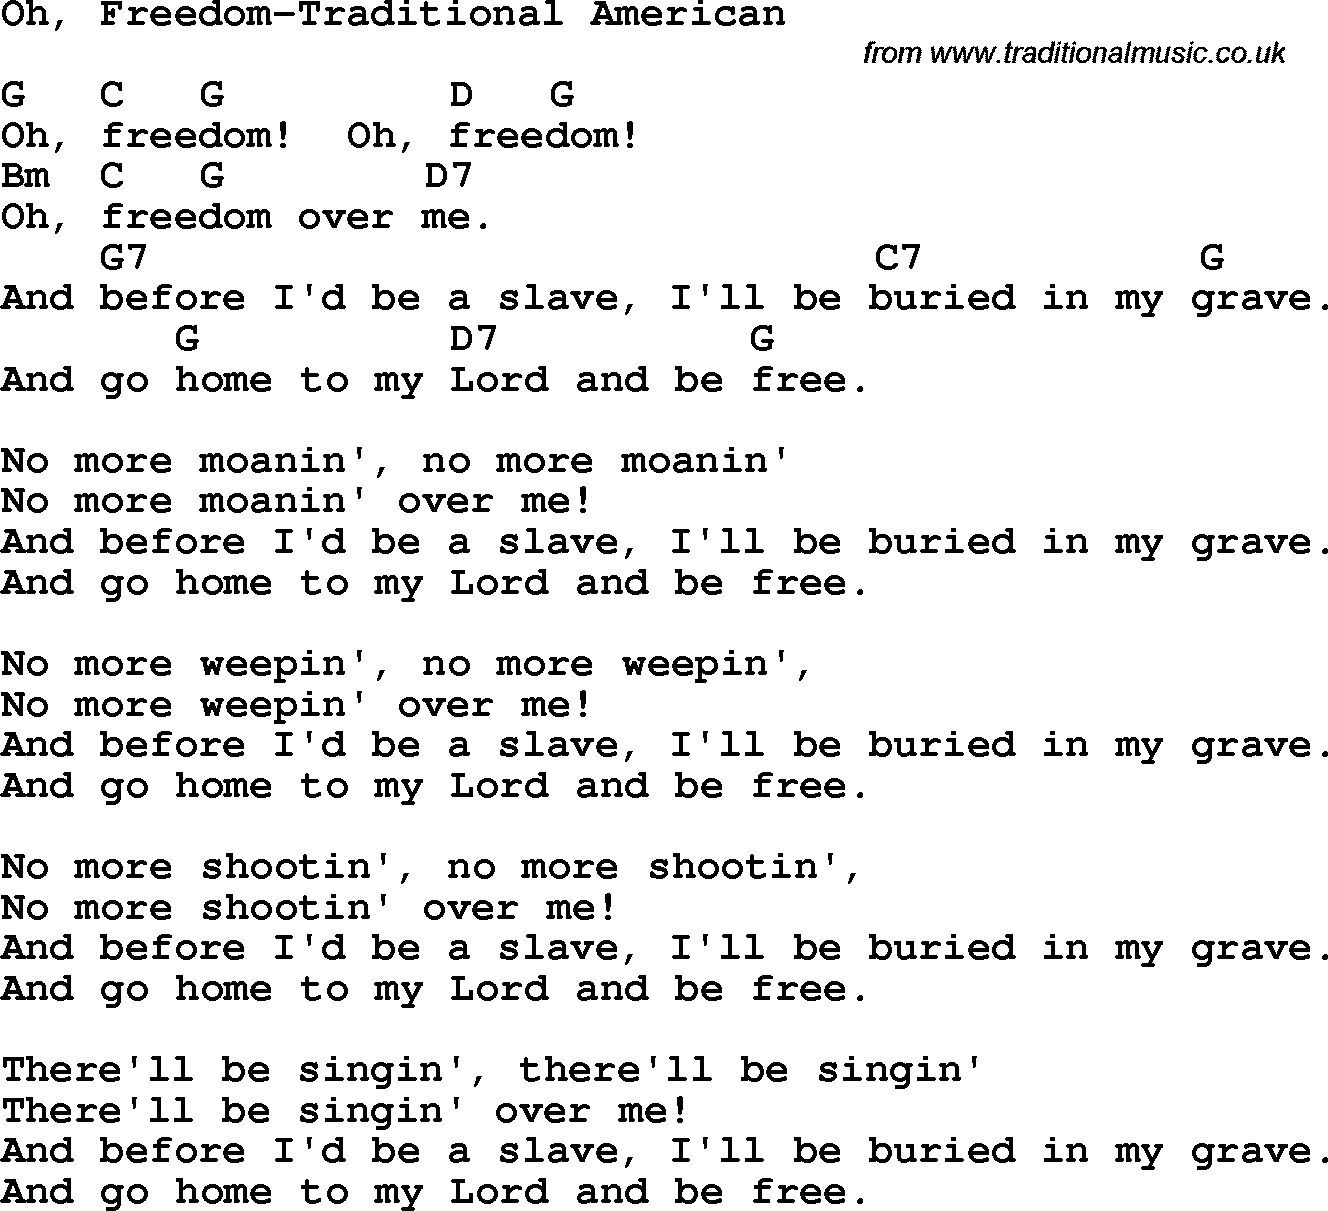 Protest Song Oh, Freedom-Traditional American lyrics and chords